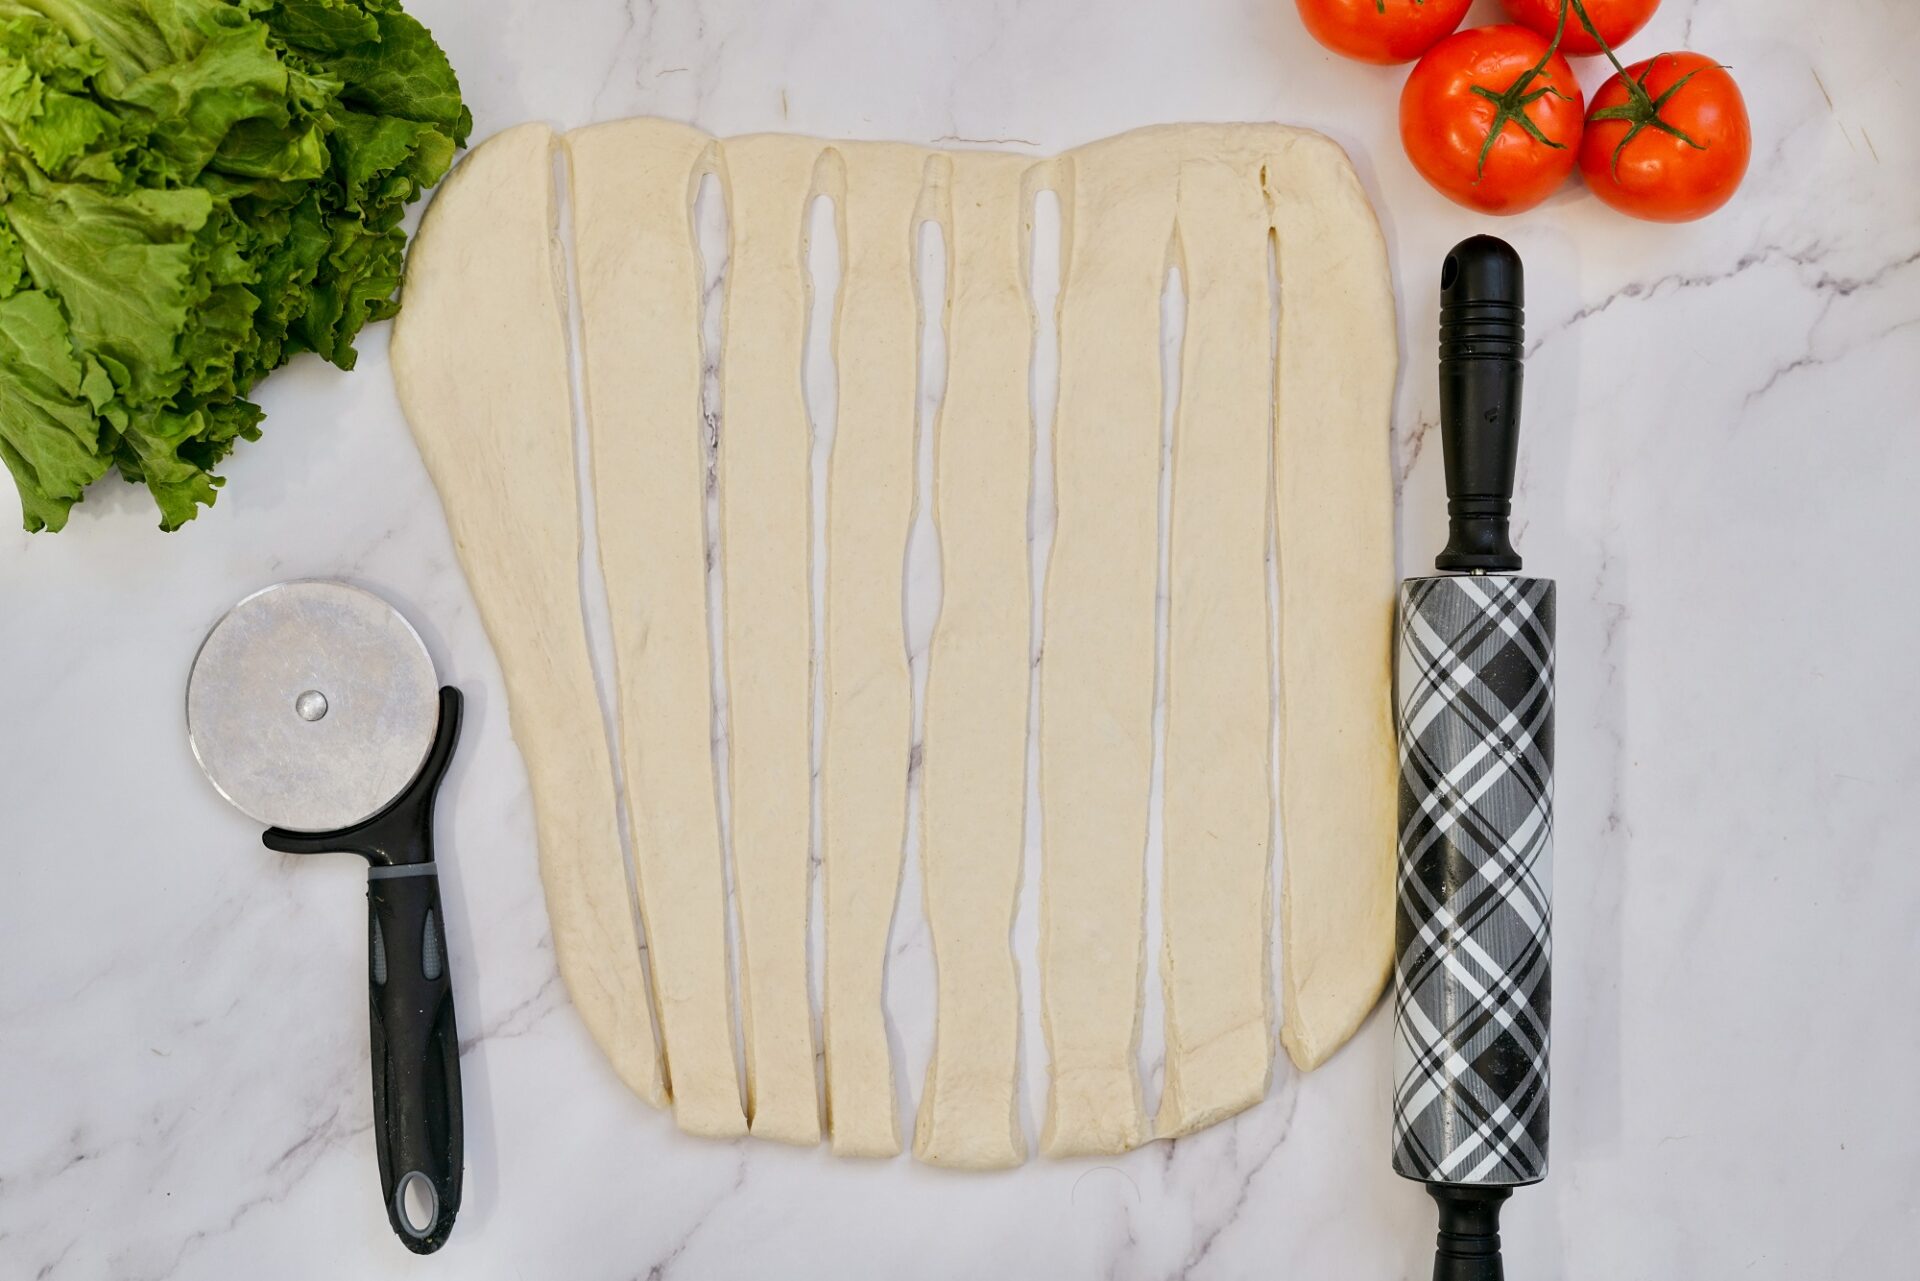 Cutting rolled out pizza dough into strips.